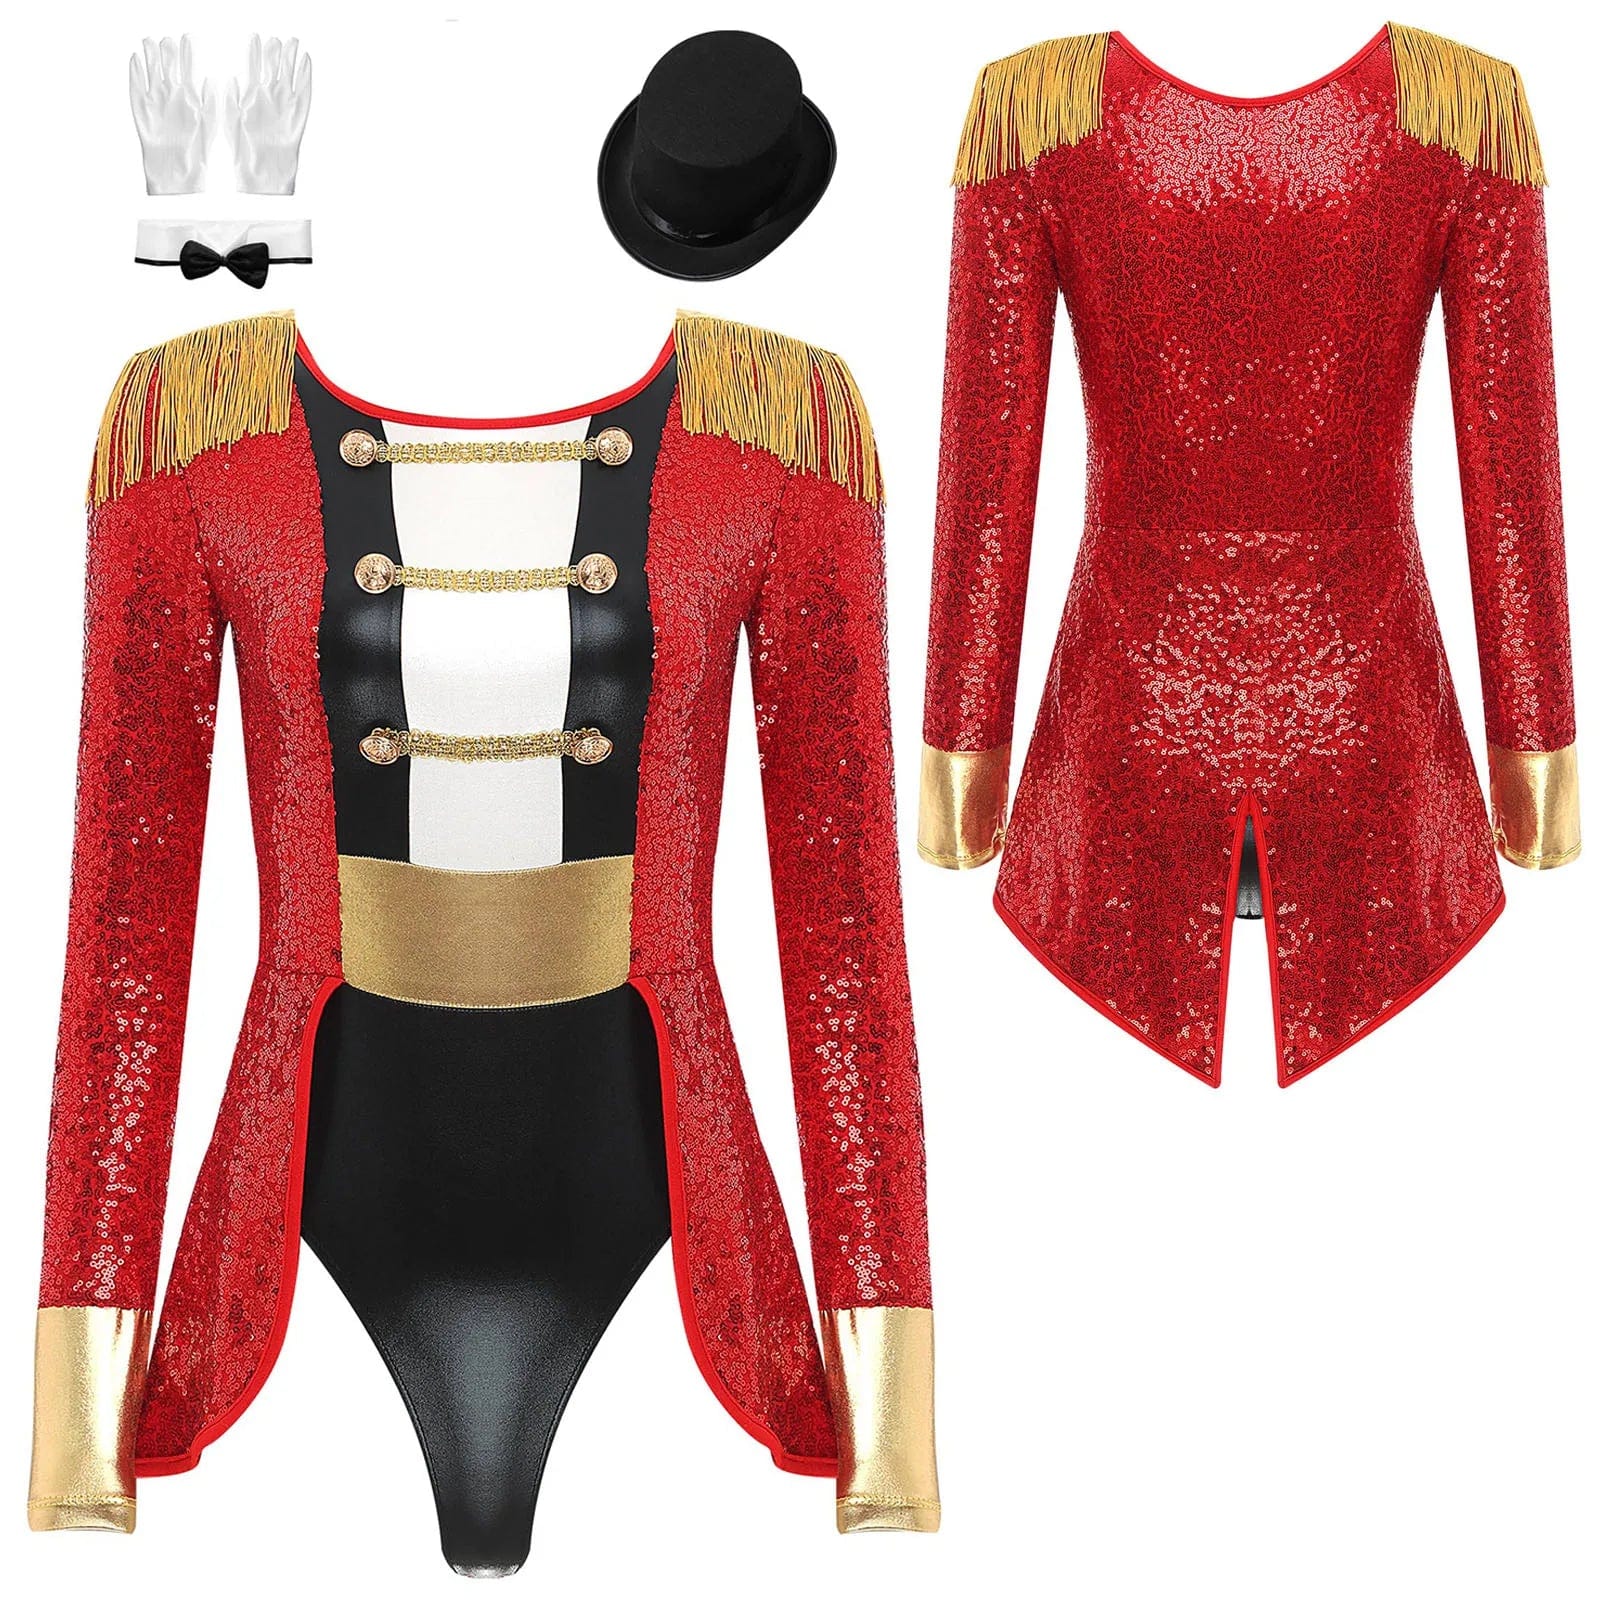 Kinky Cloth Red D / S Circus Ringmaster Outfit Costumes